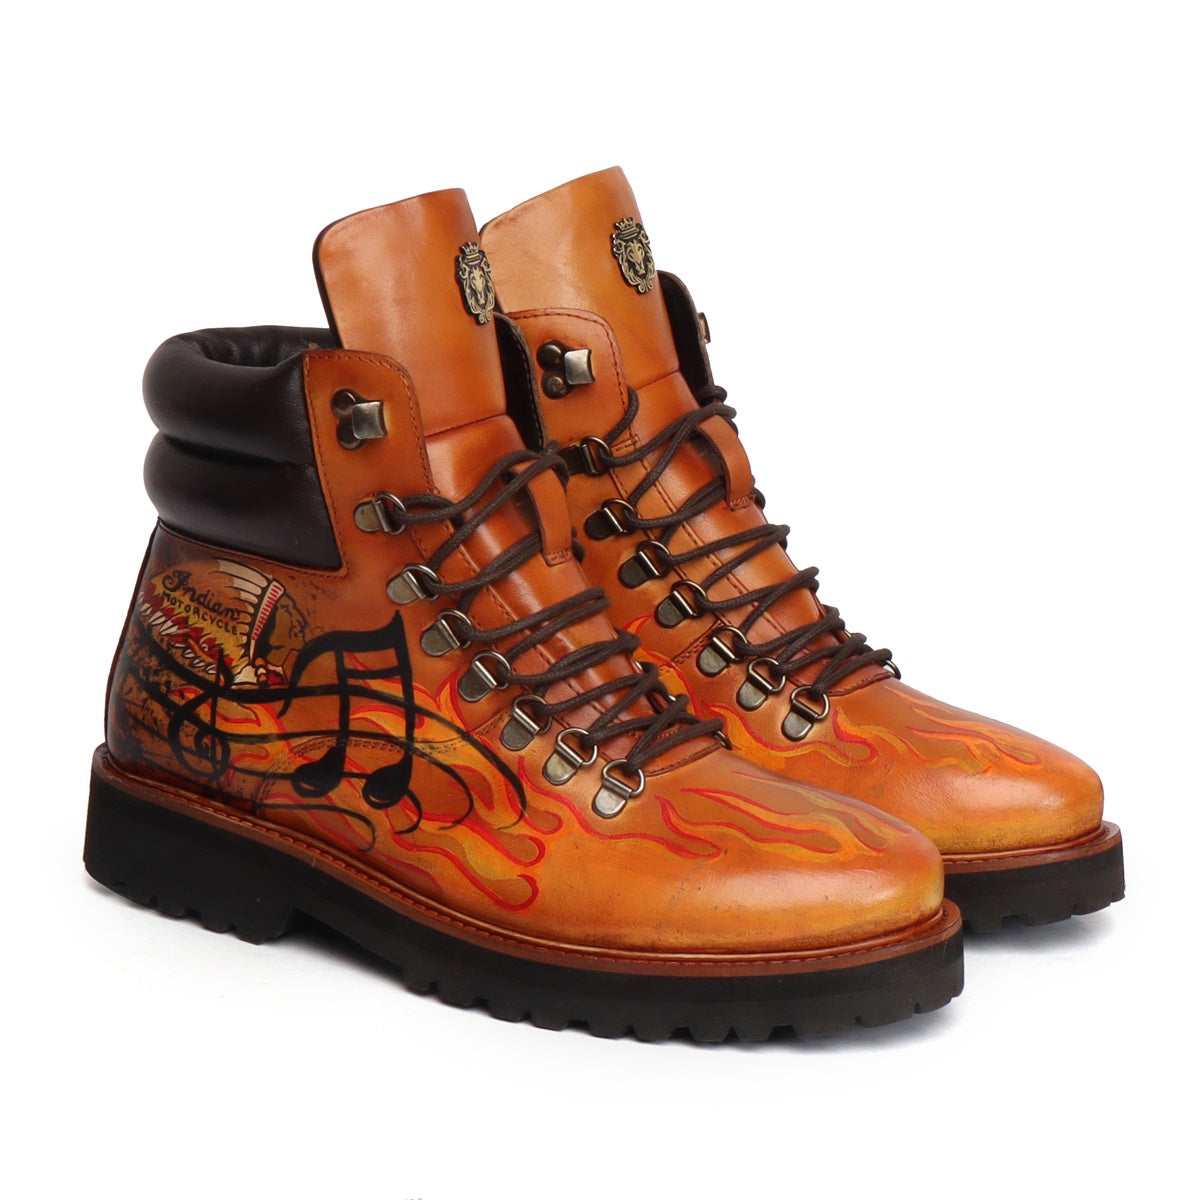 Bespoked Tan Leather Hand Painted Lace-Up Boots by Brune & Bareskin